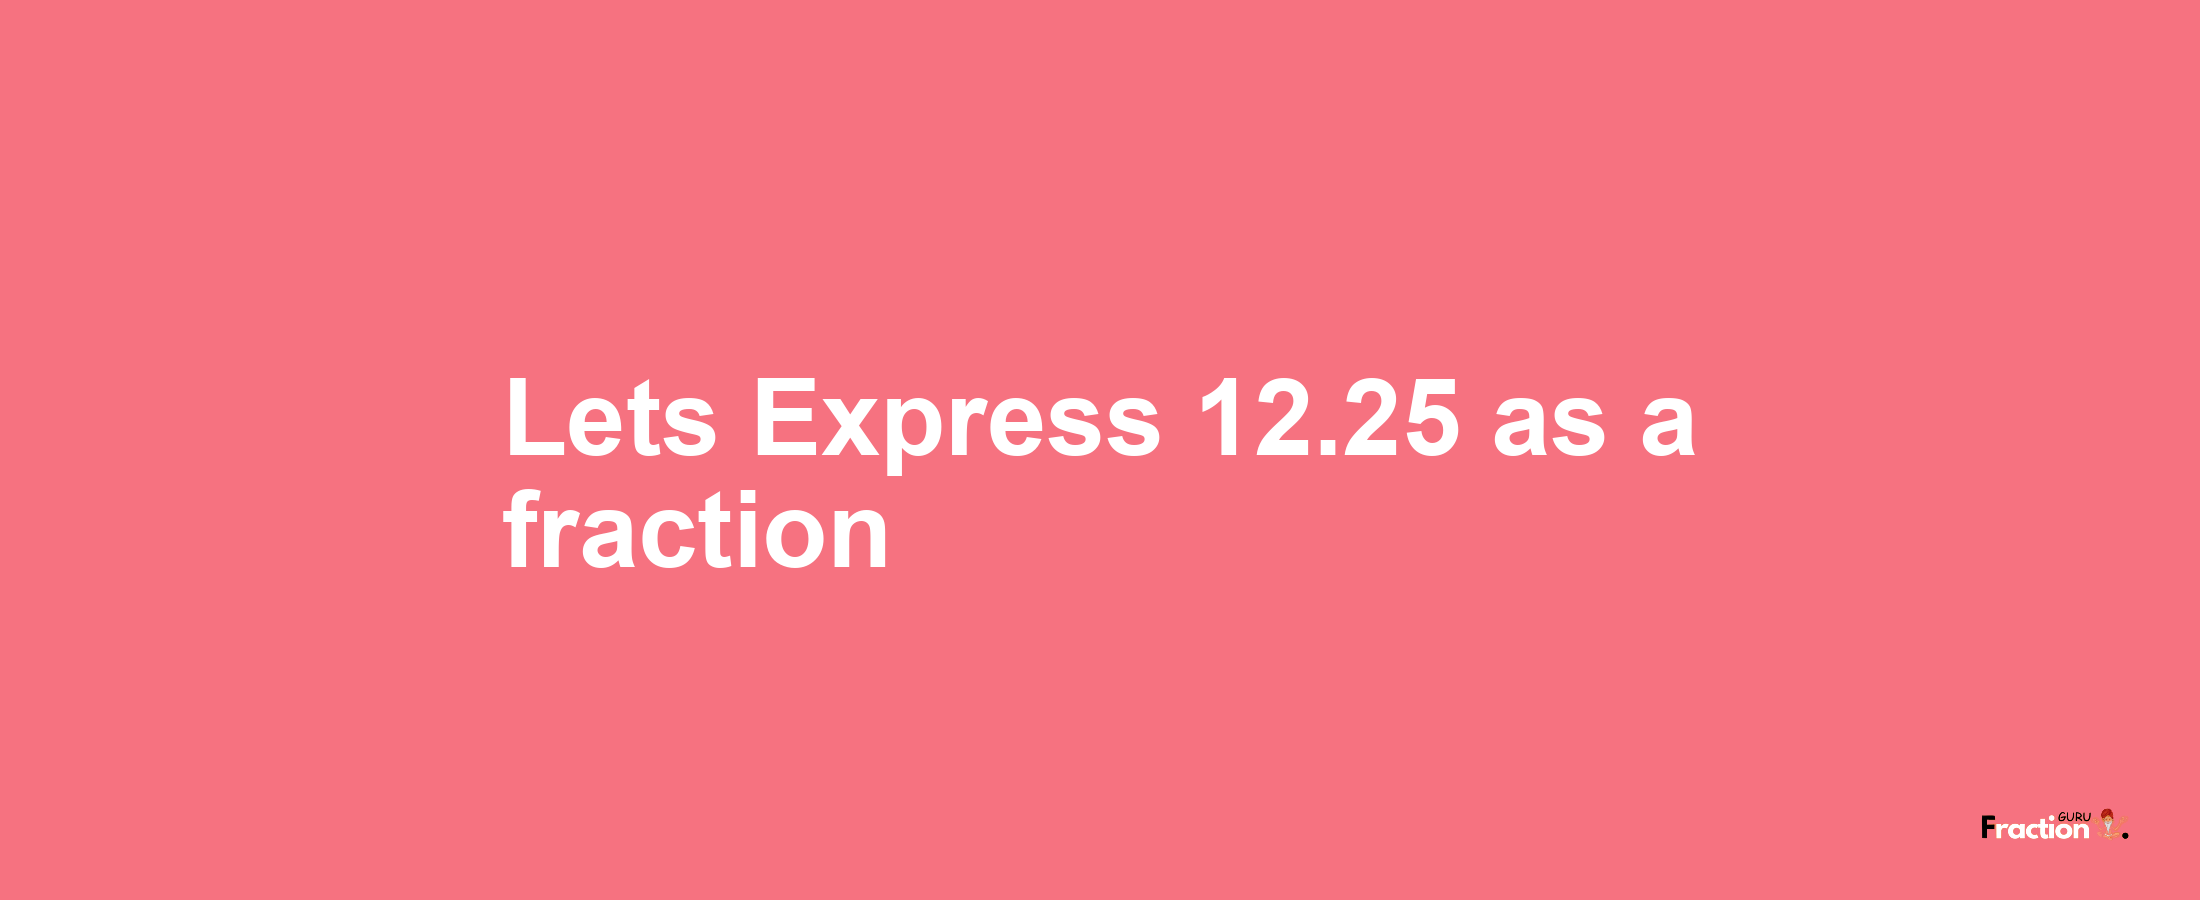 Lets Express 12.25 as afraction